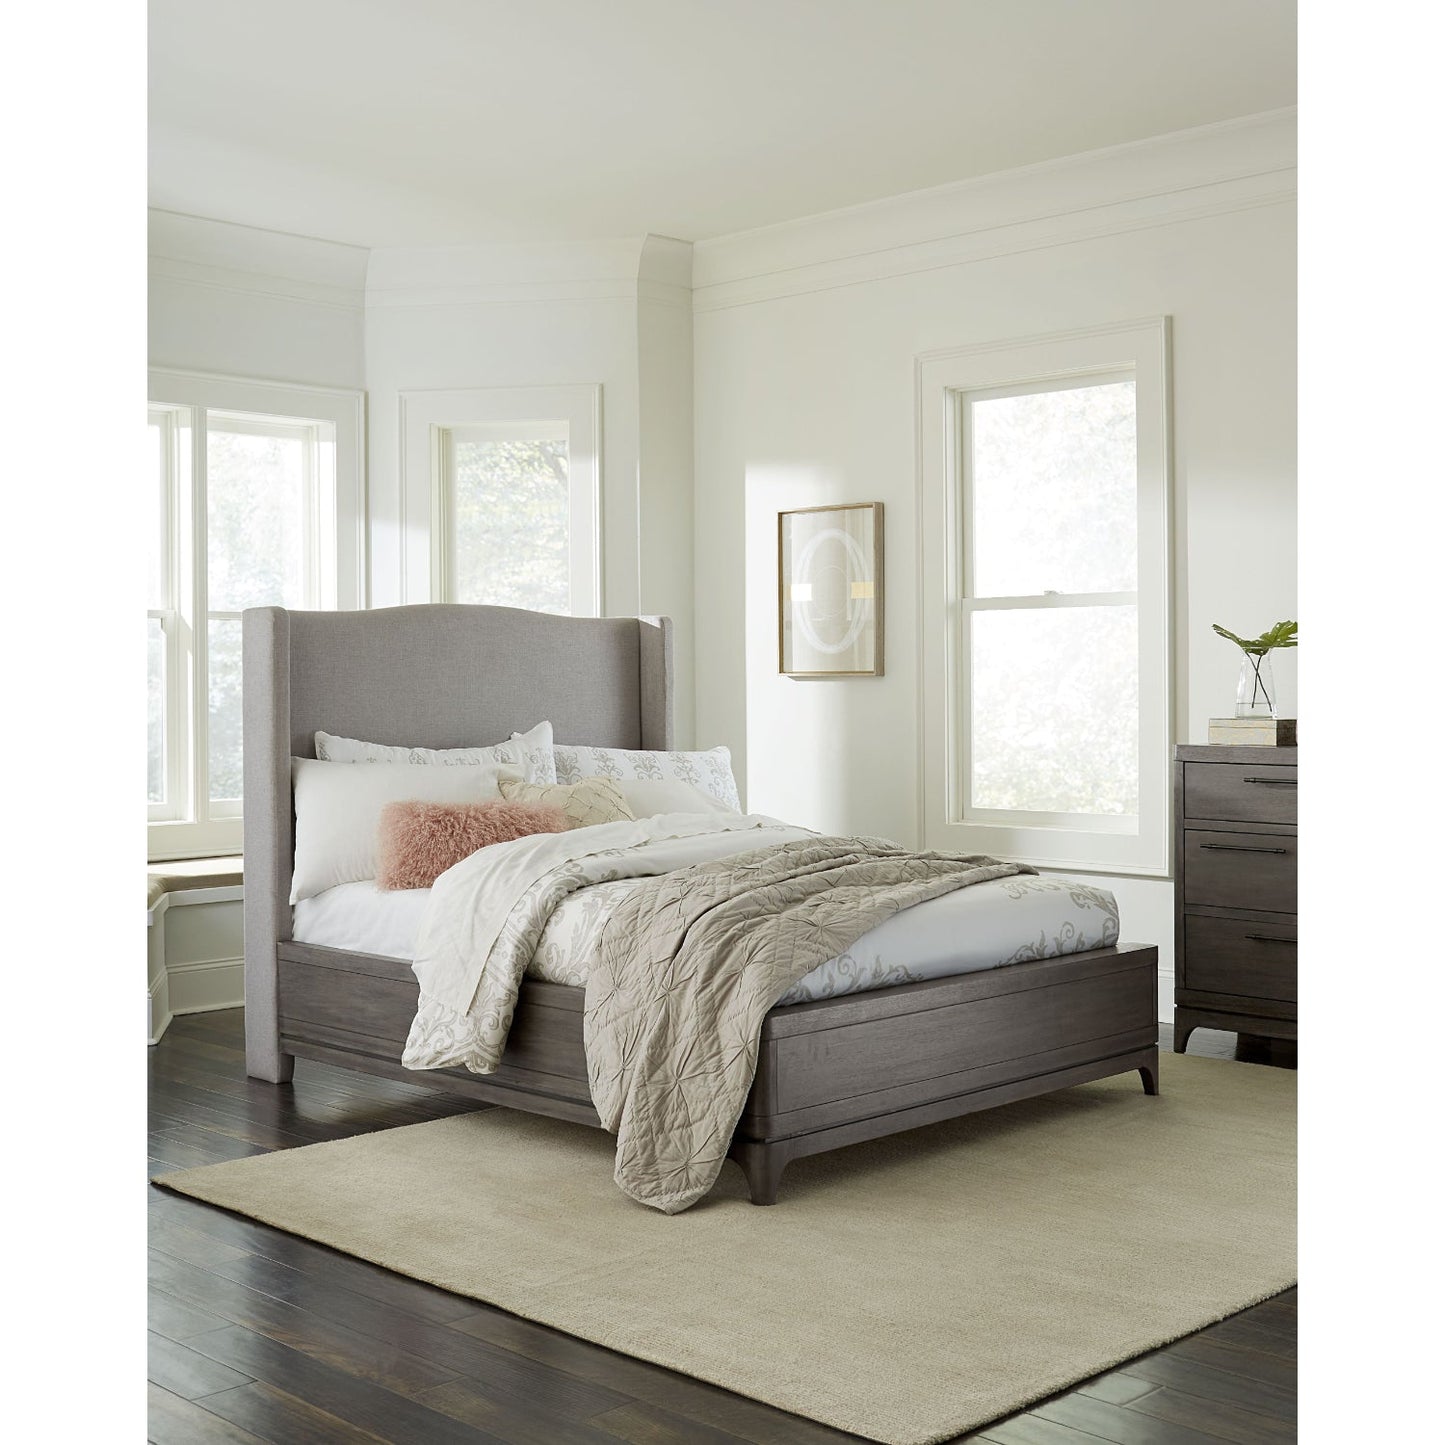 Modus Cicero Cal King Upholstered Bed in Rustic Latte